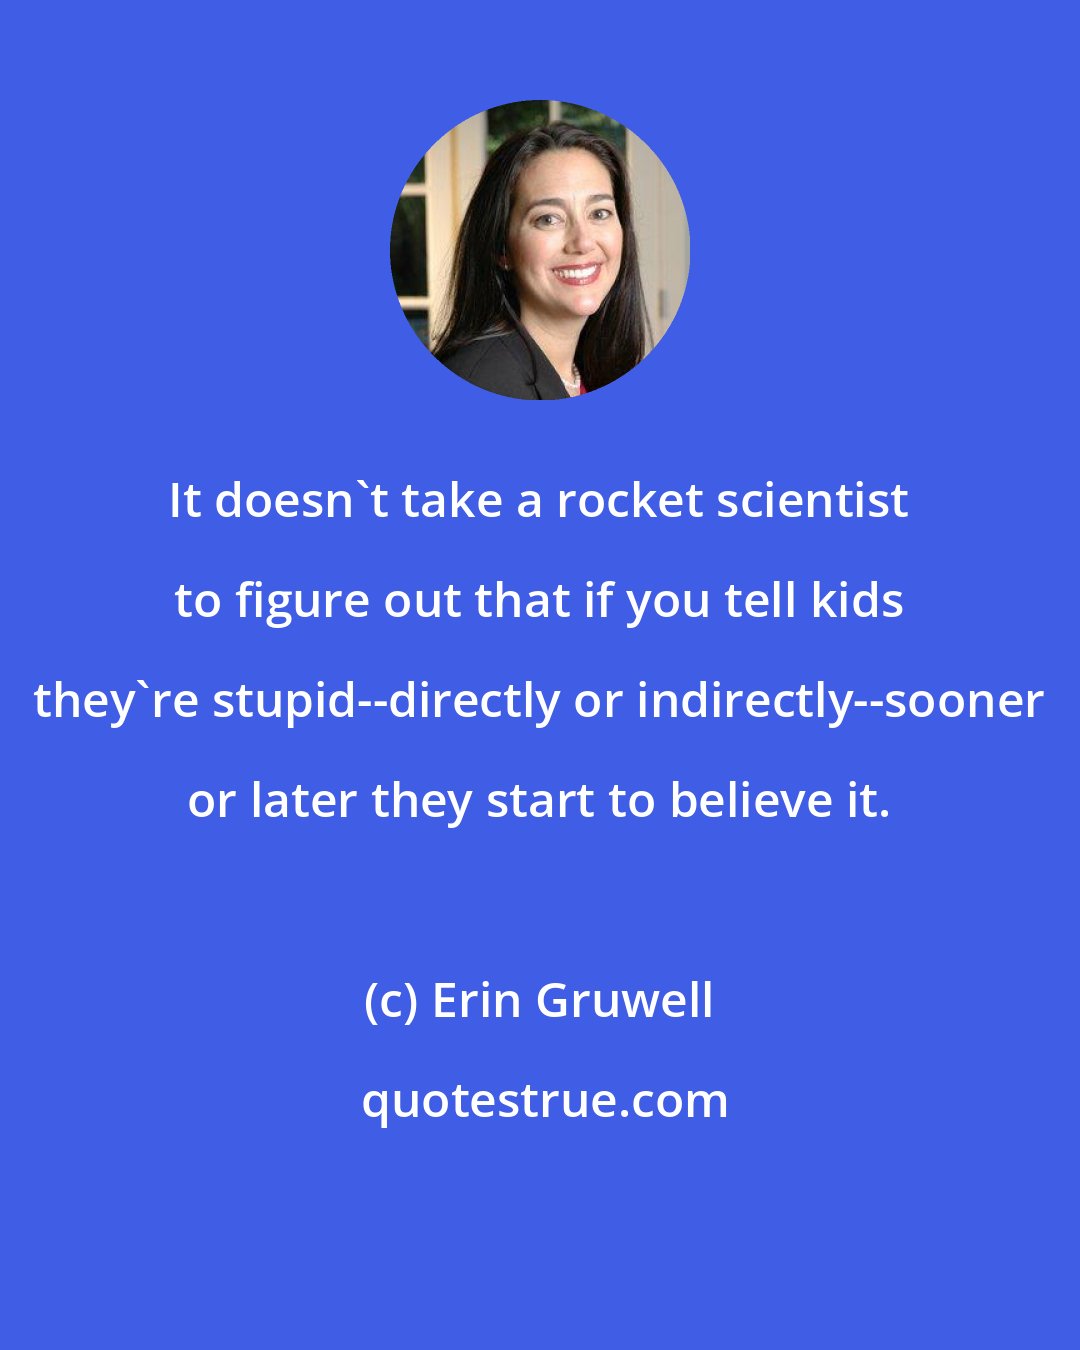 Erin Gruwell: It doesn't take a rocket scientist to figure out that if you tell kids they're stupid--directly or indirectly--sooner or later they start to believe it.